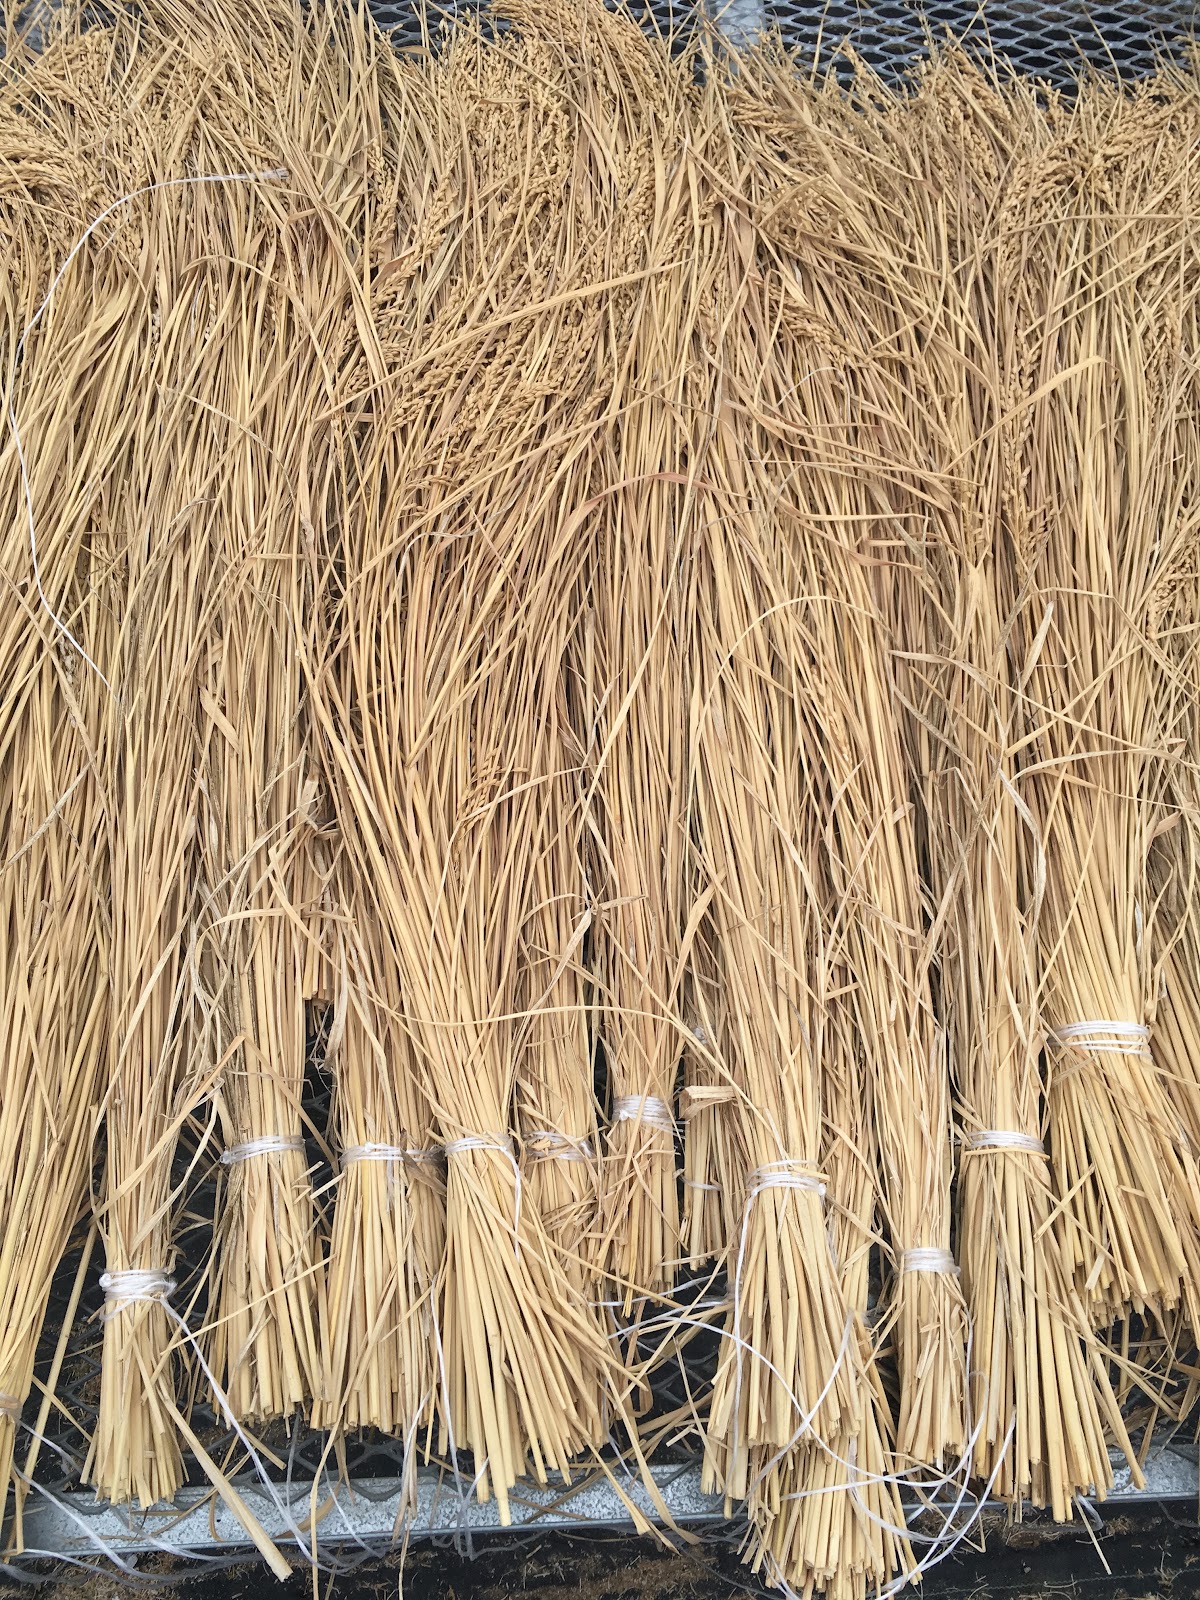 Fully dried rice bundles ready for processing